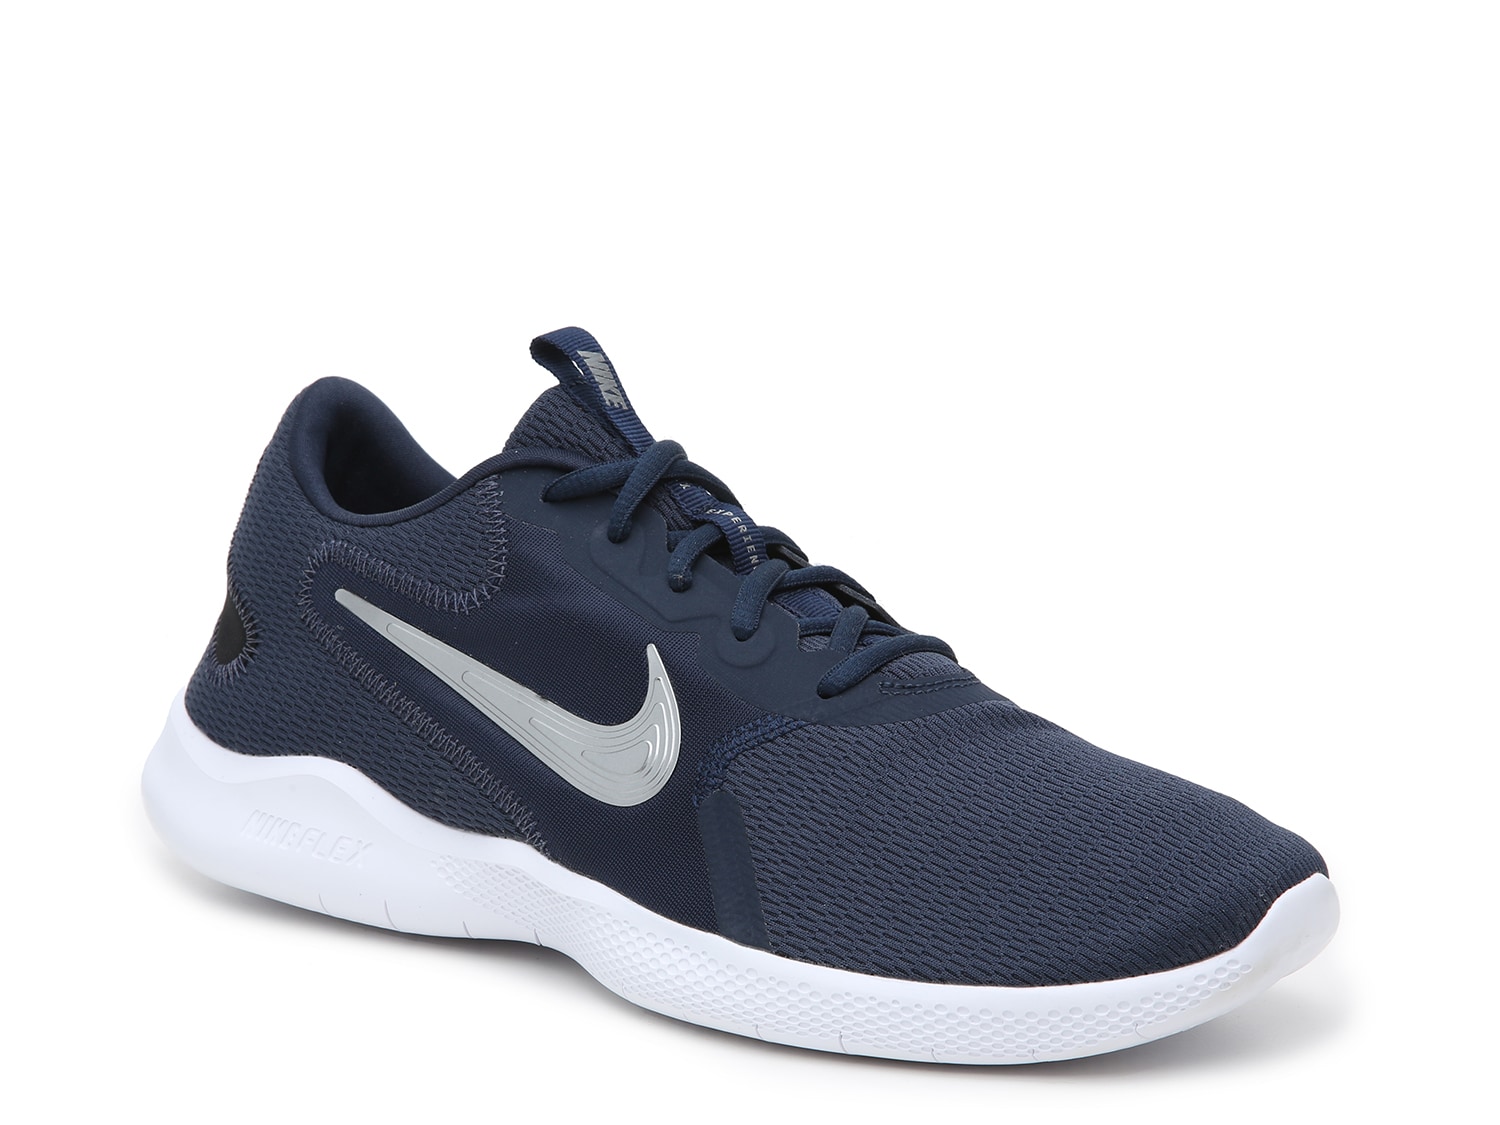 nike navy blue shoes